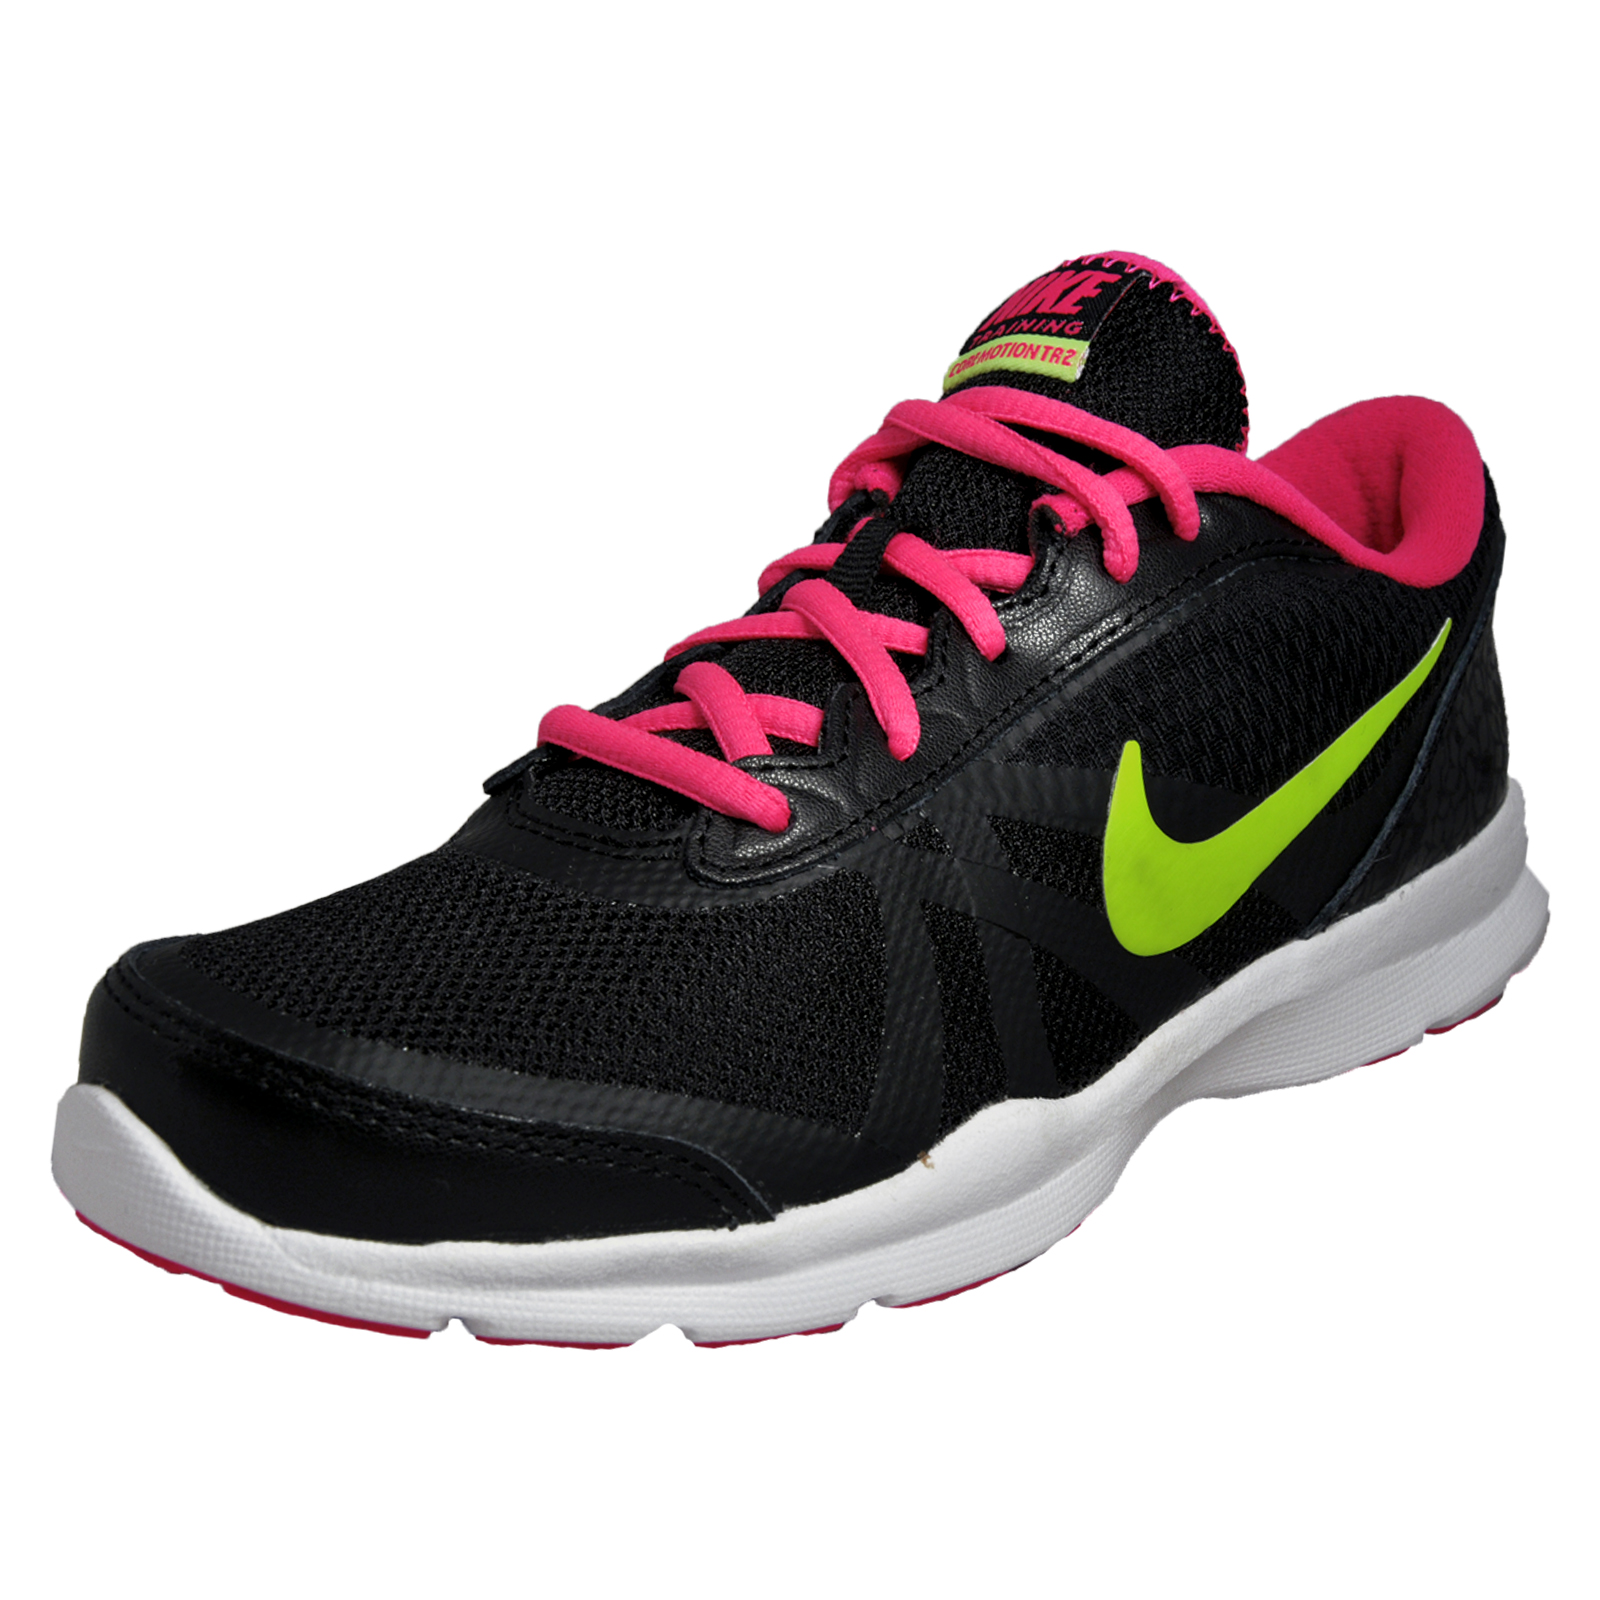 Nike Core Motion TR 2 Womens Running Shoes Fitness Gym Trainers Black ...